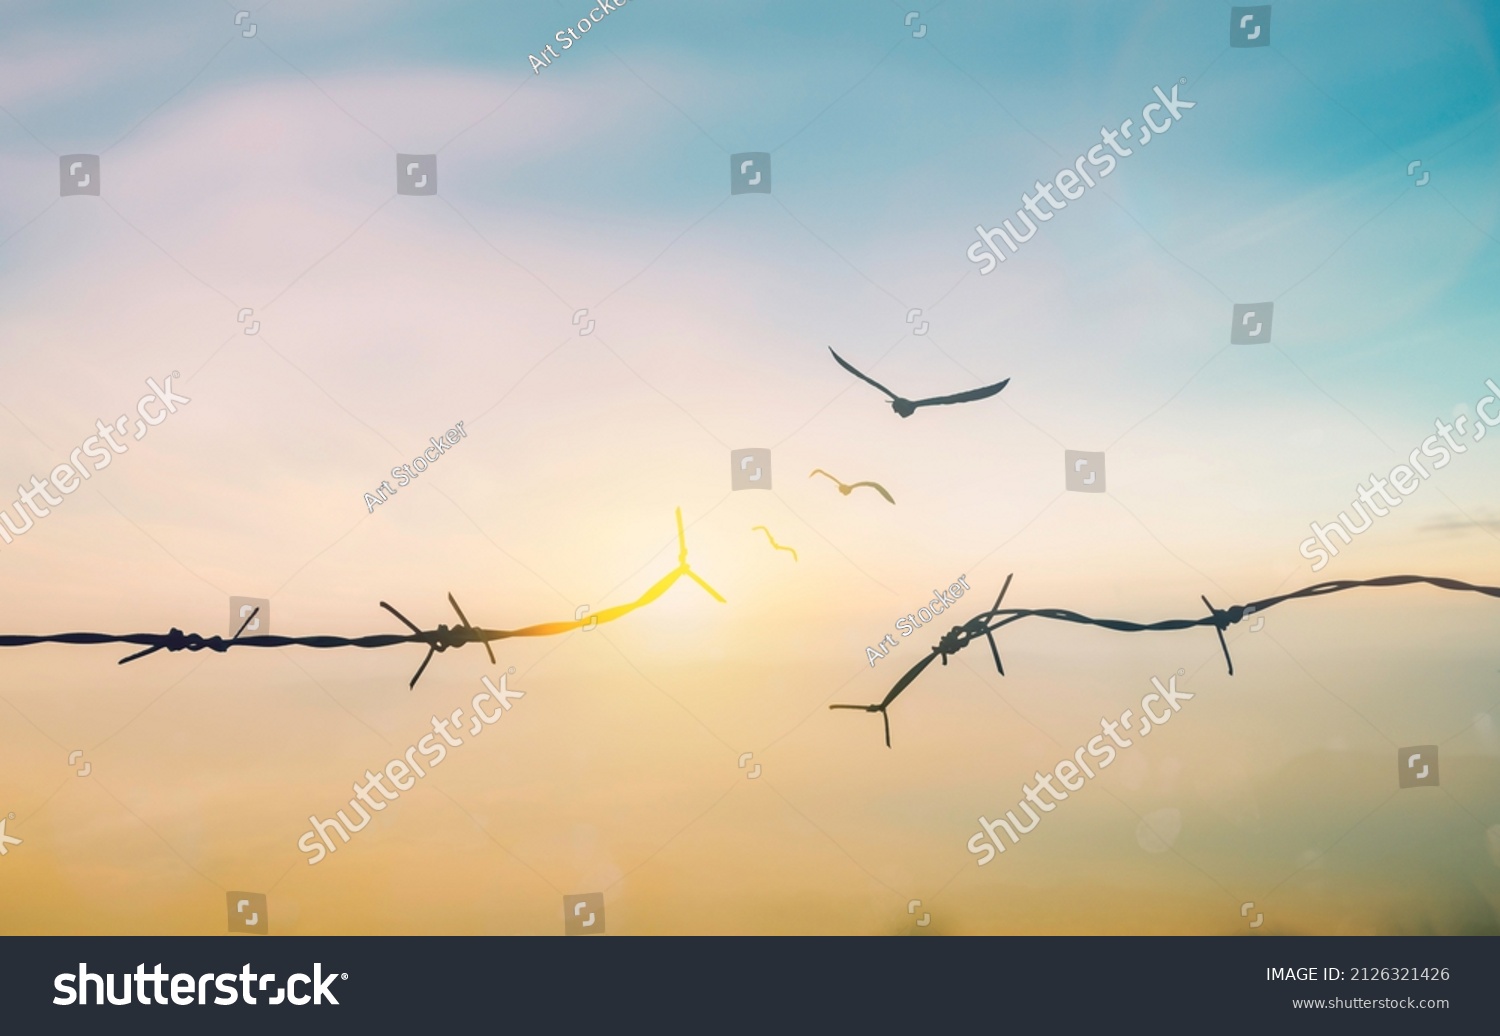 Abstract Barrier wire fence refugee Twilight sky. Deliverance Broke spike change bird boundary human rights slave prison jail break hope freedom justice social liberty day world war emancipation win. #2126321426